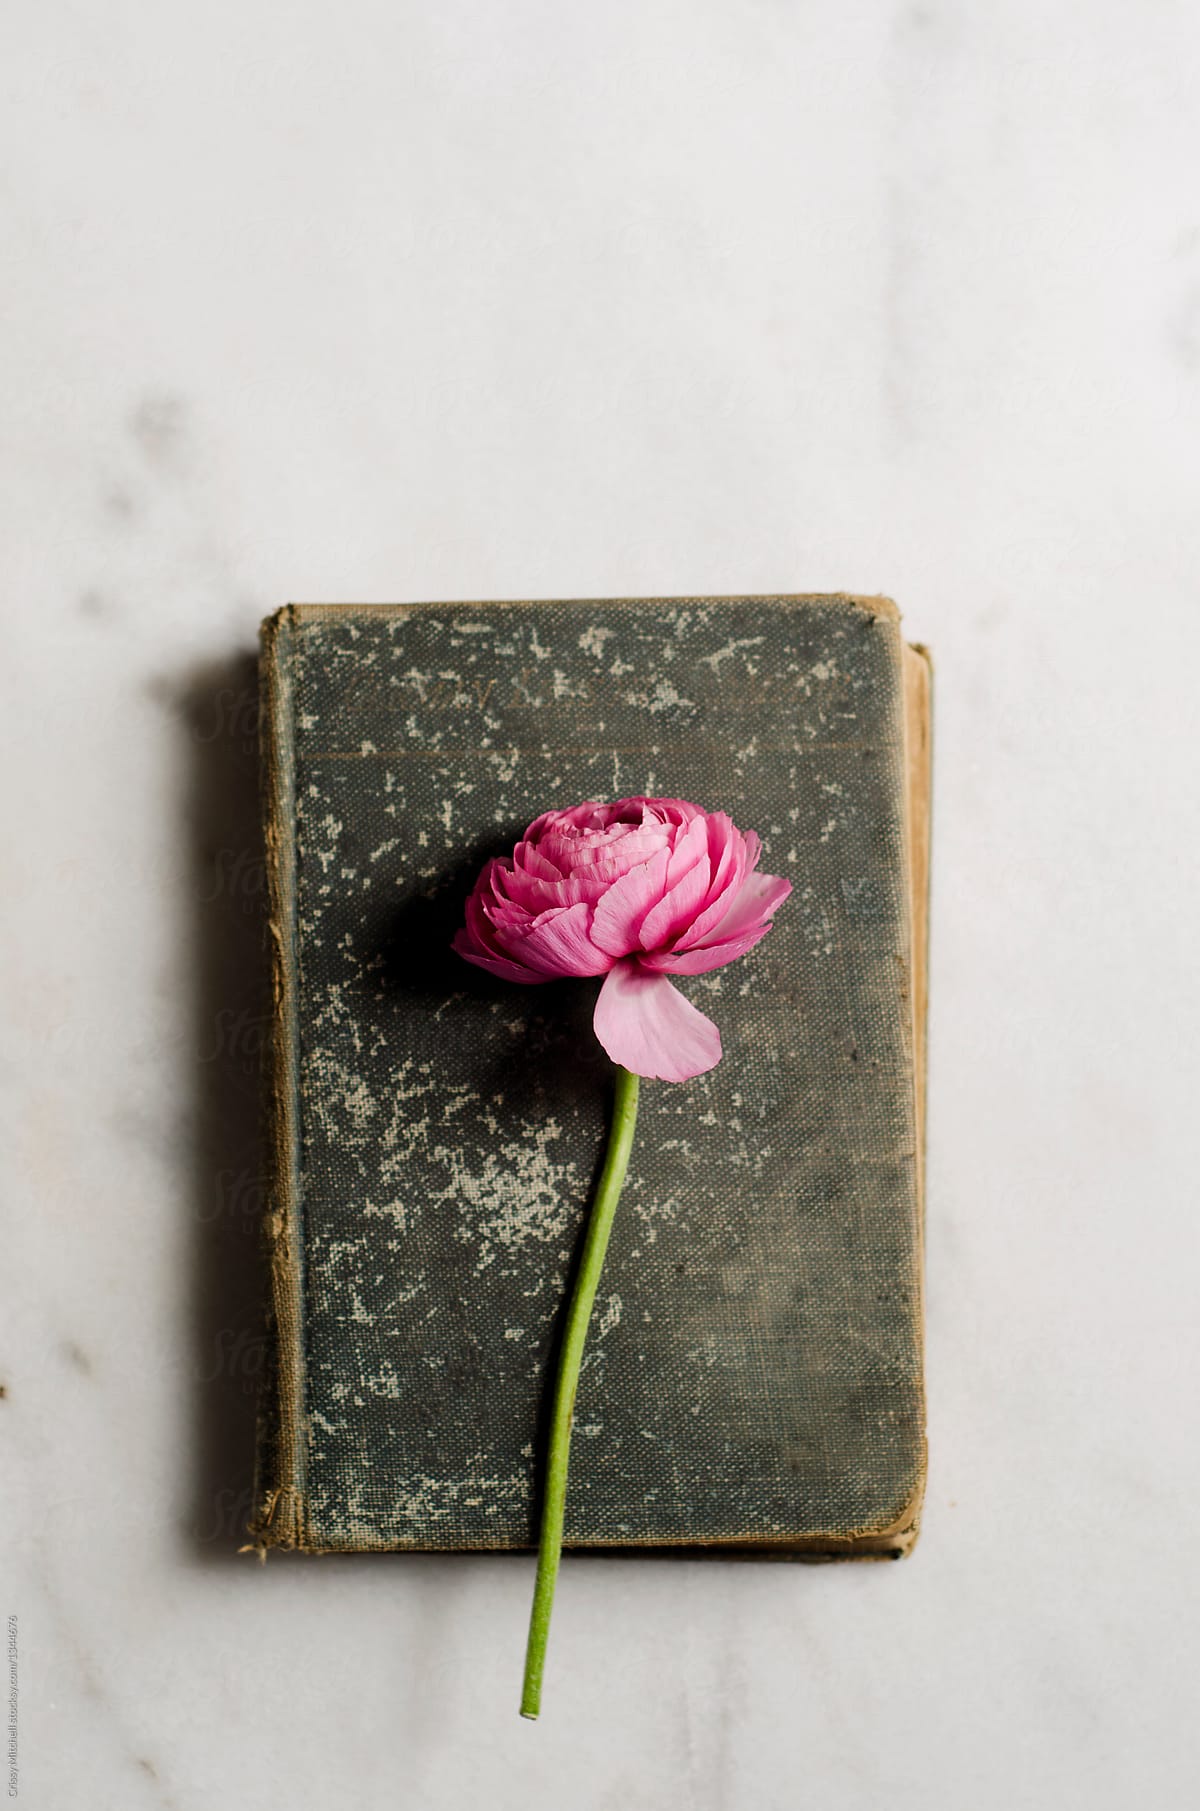 A flower and a book